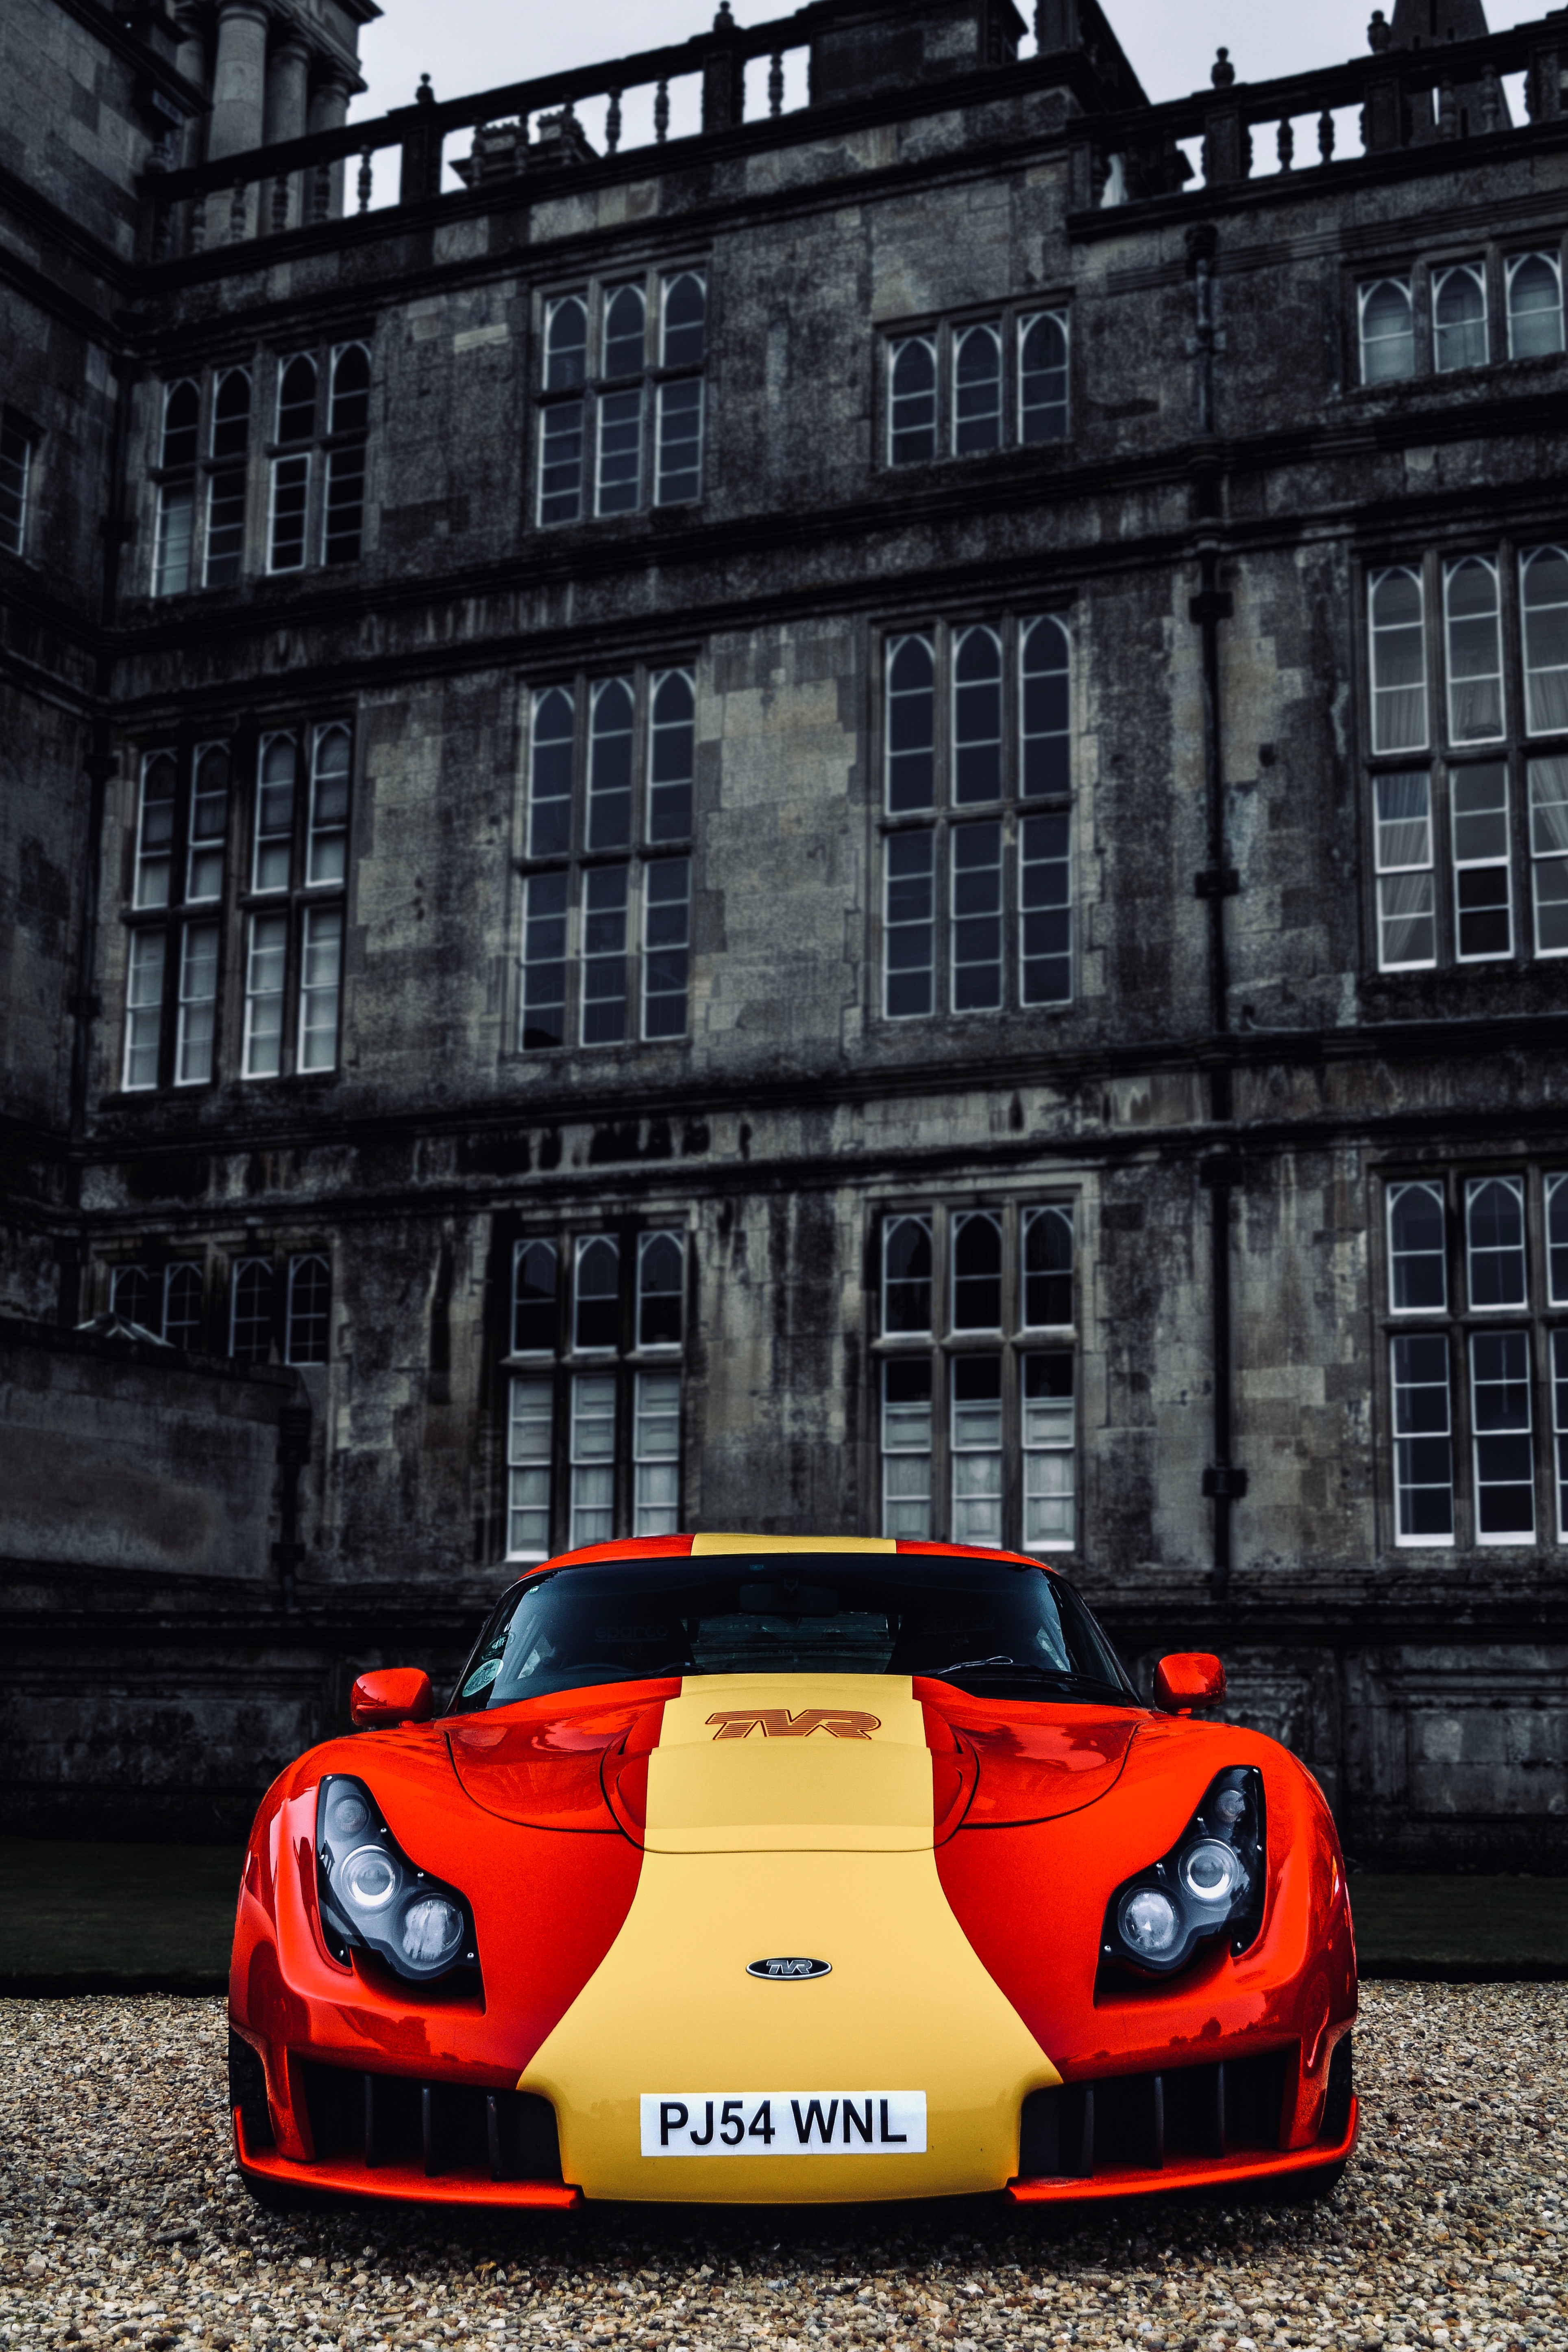 sports, cars, yellow, red, car, front view, machine, sports car, tvr sagaris